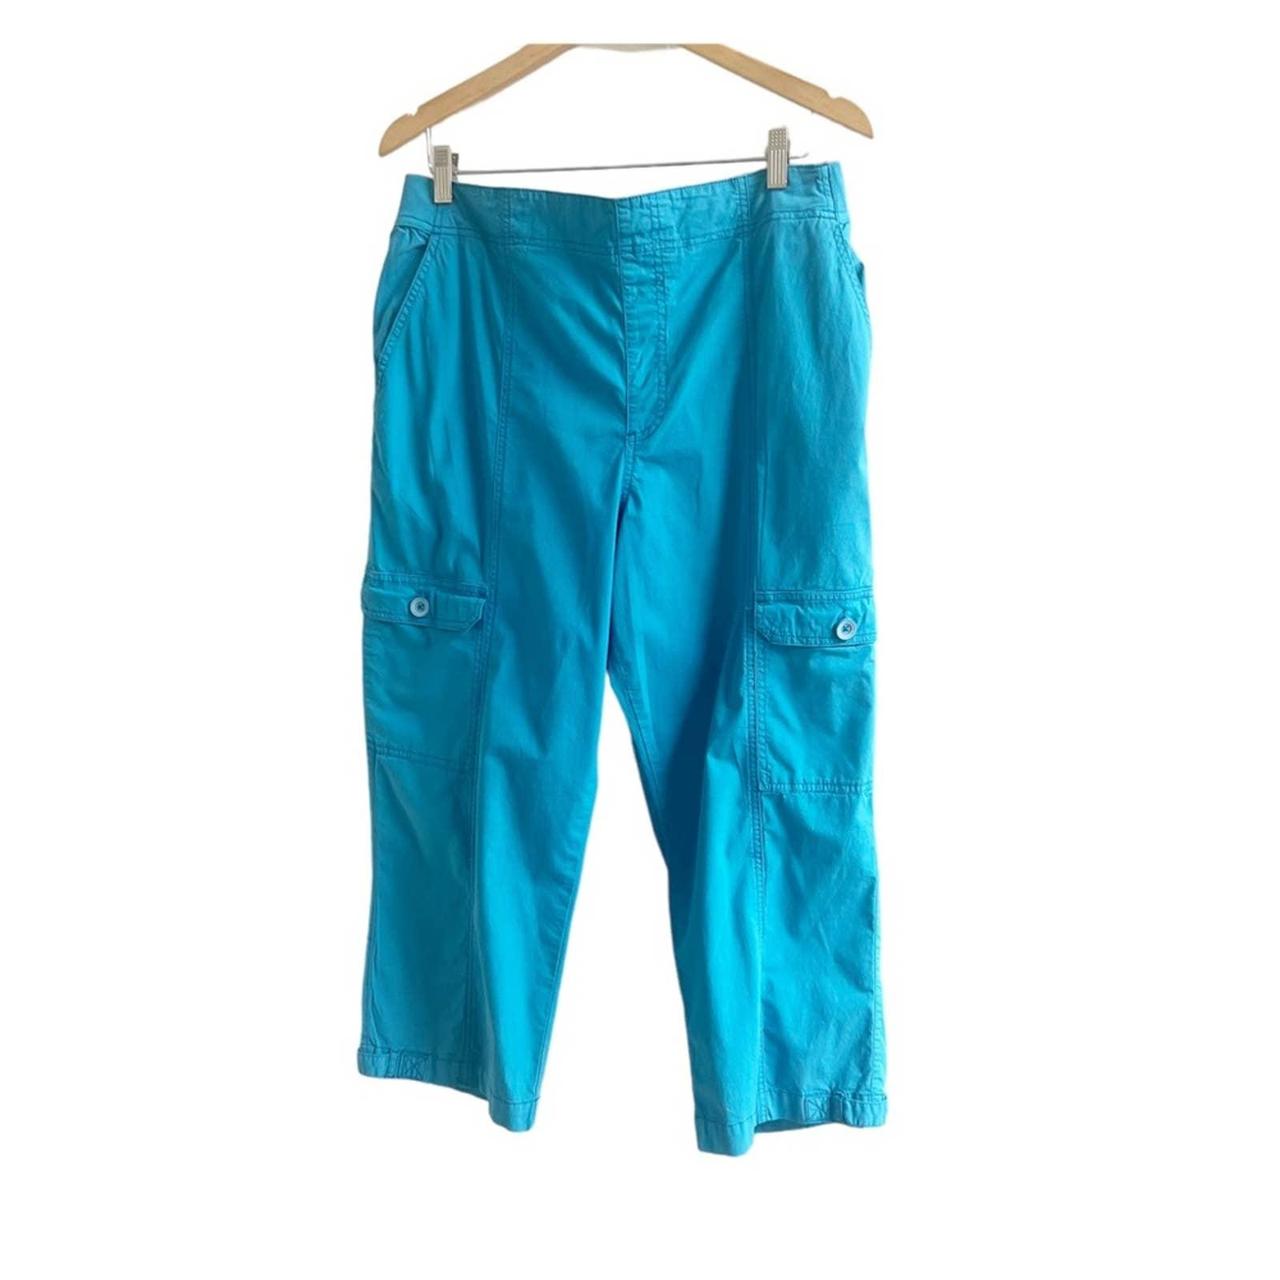 Soft Surroundings Cropped Blue Cargo Pants Pull On - Depop